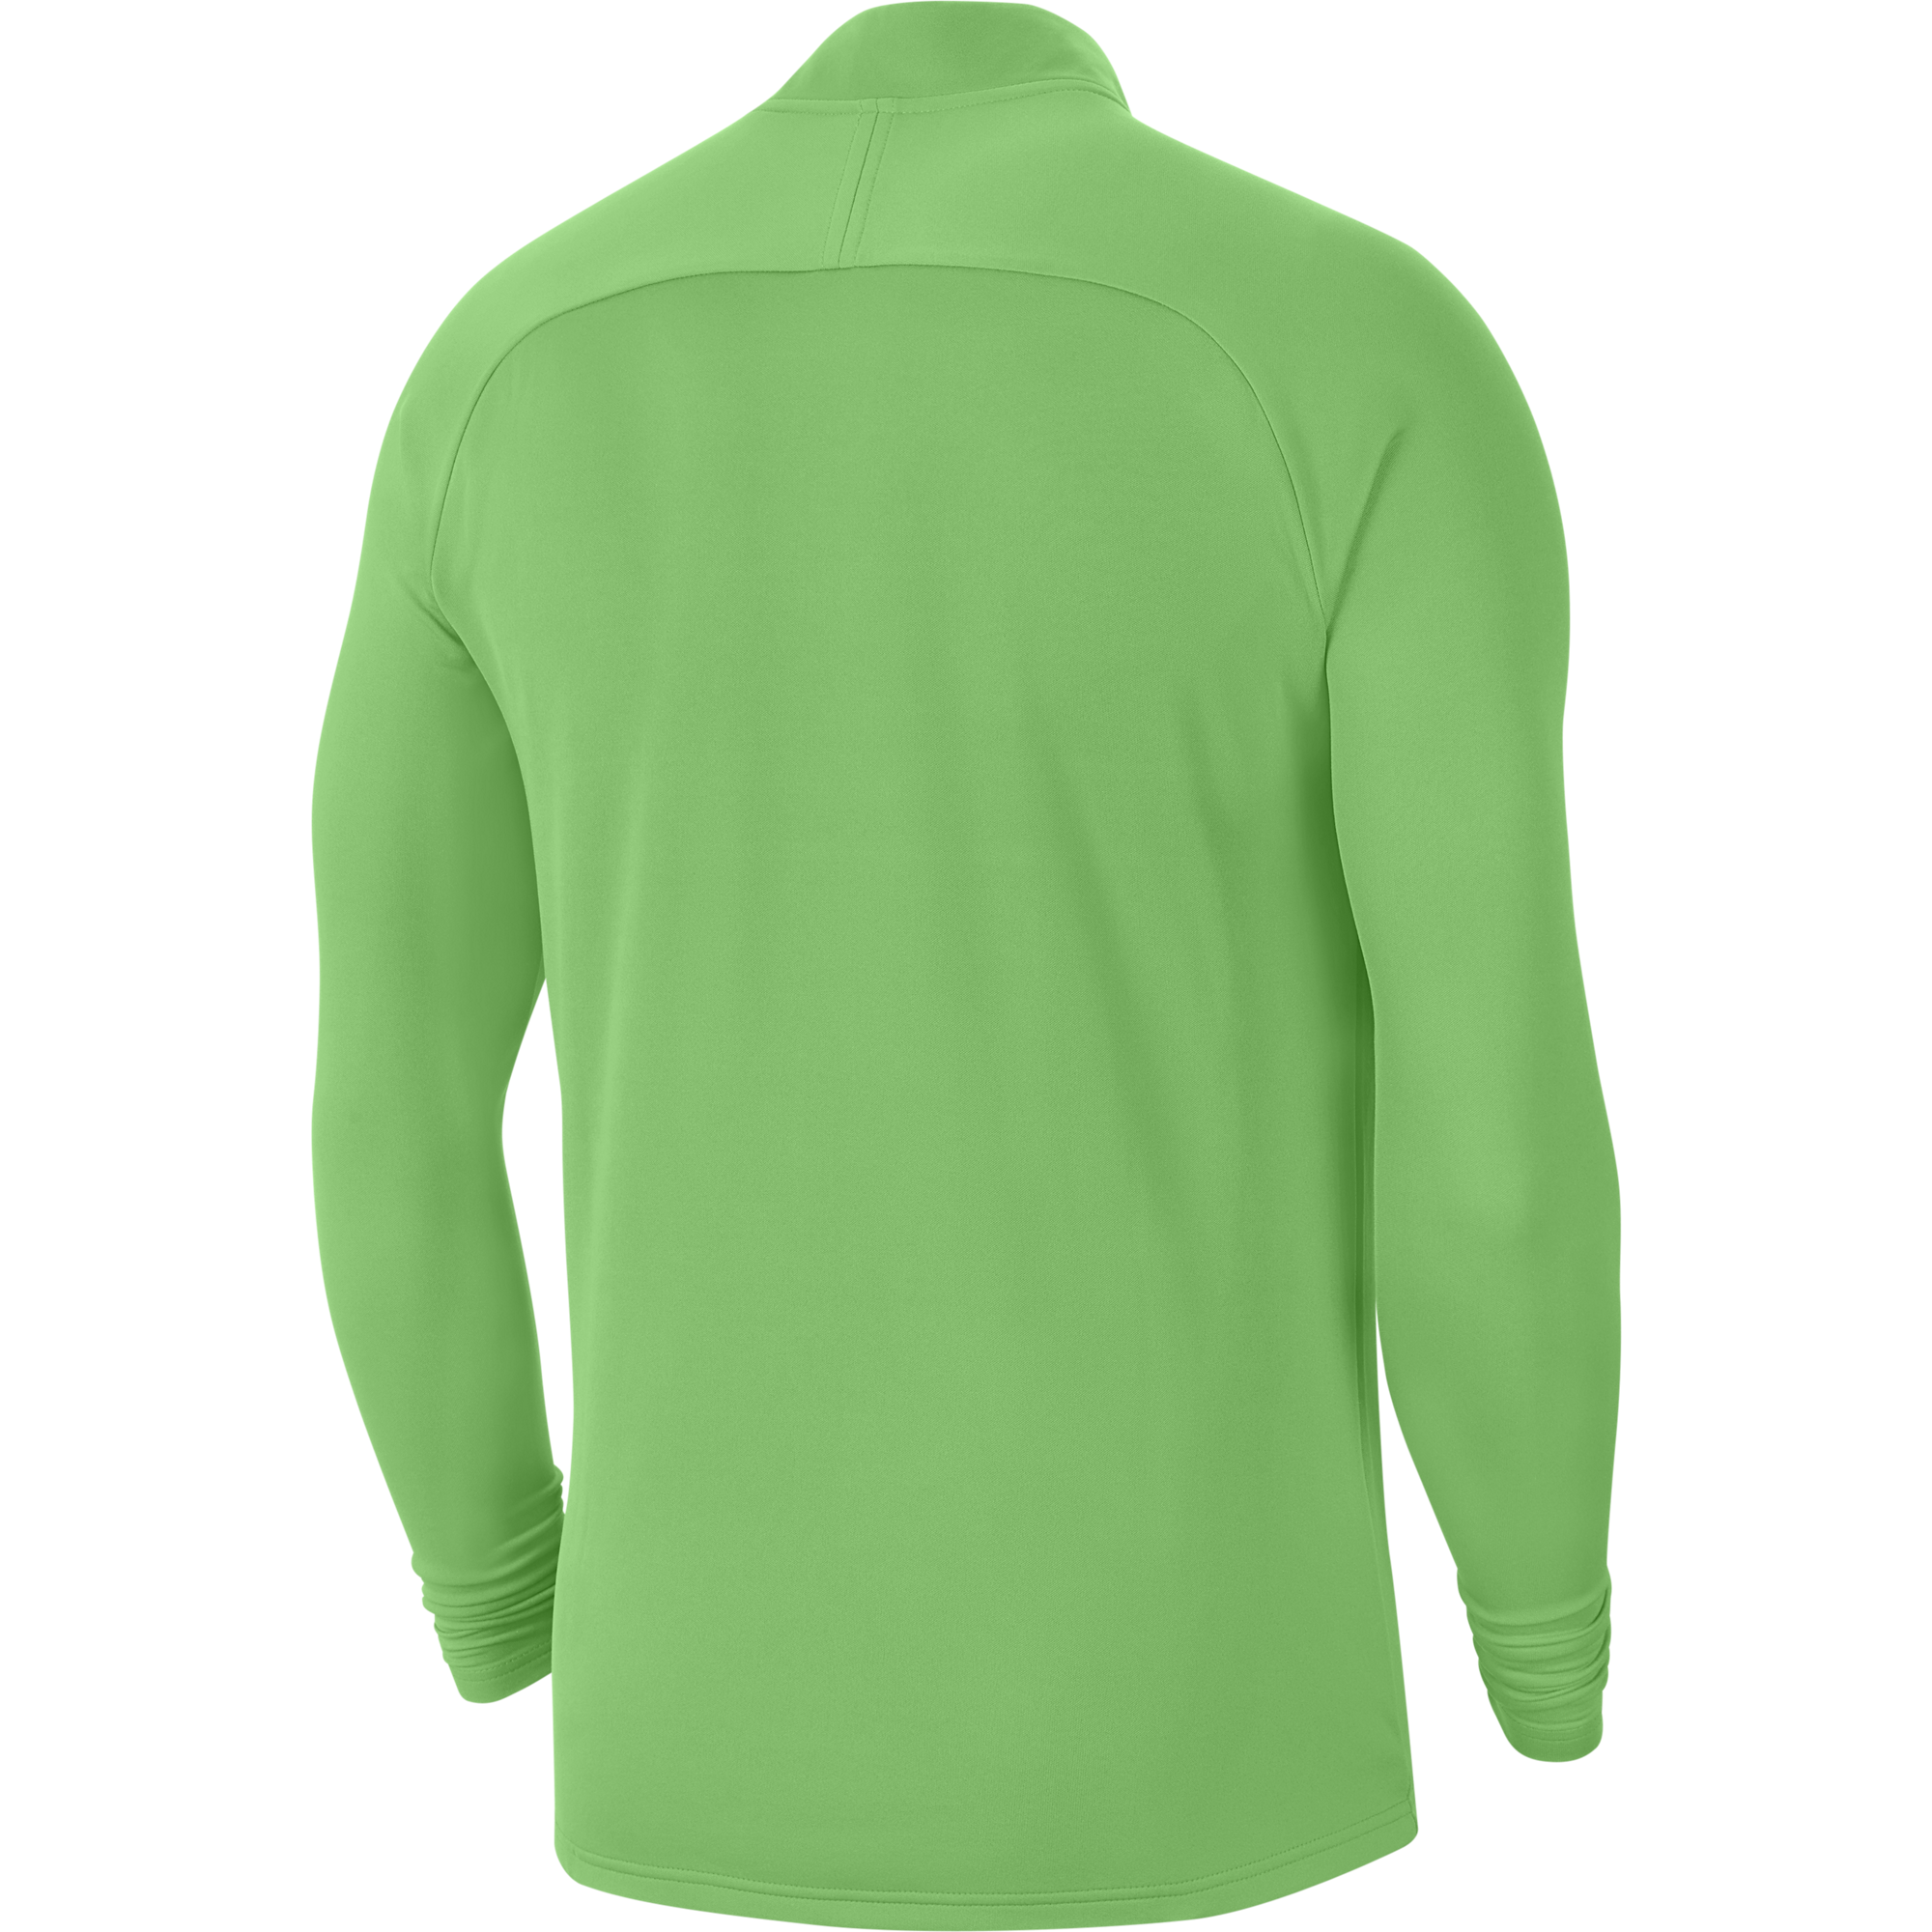 Academy 21 Drill Top (Youth)